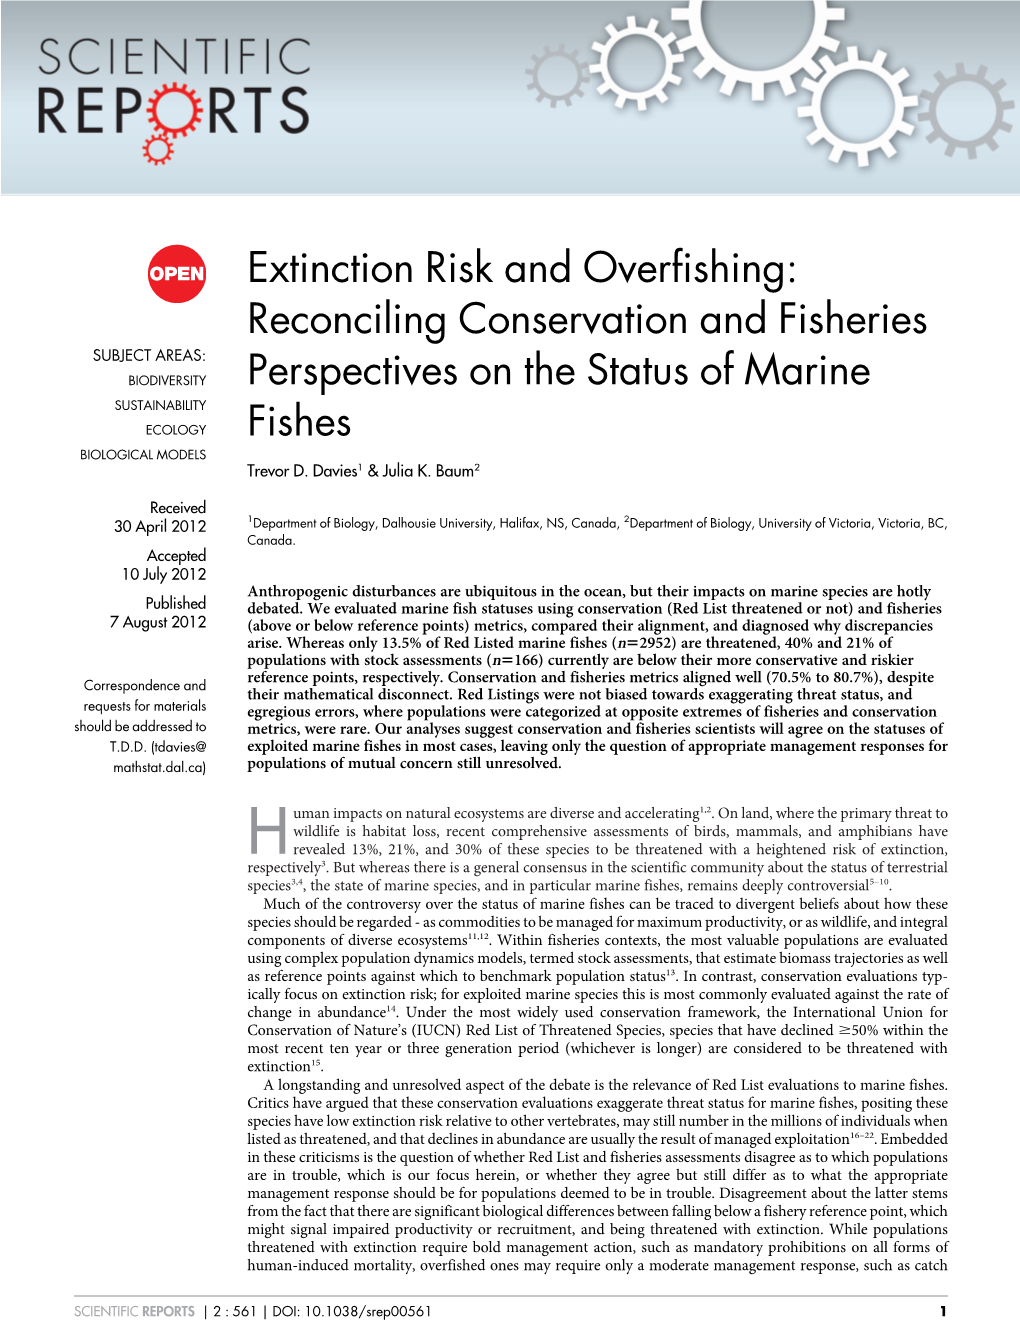 Extinction Risk and Overfishing: Reconciling Conservation And